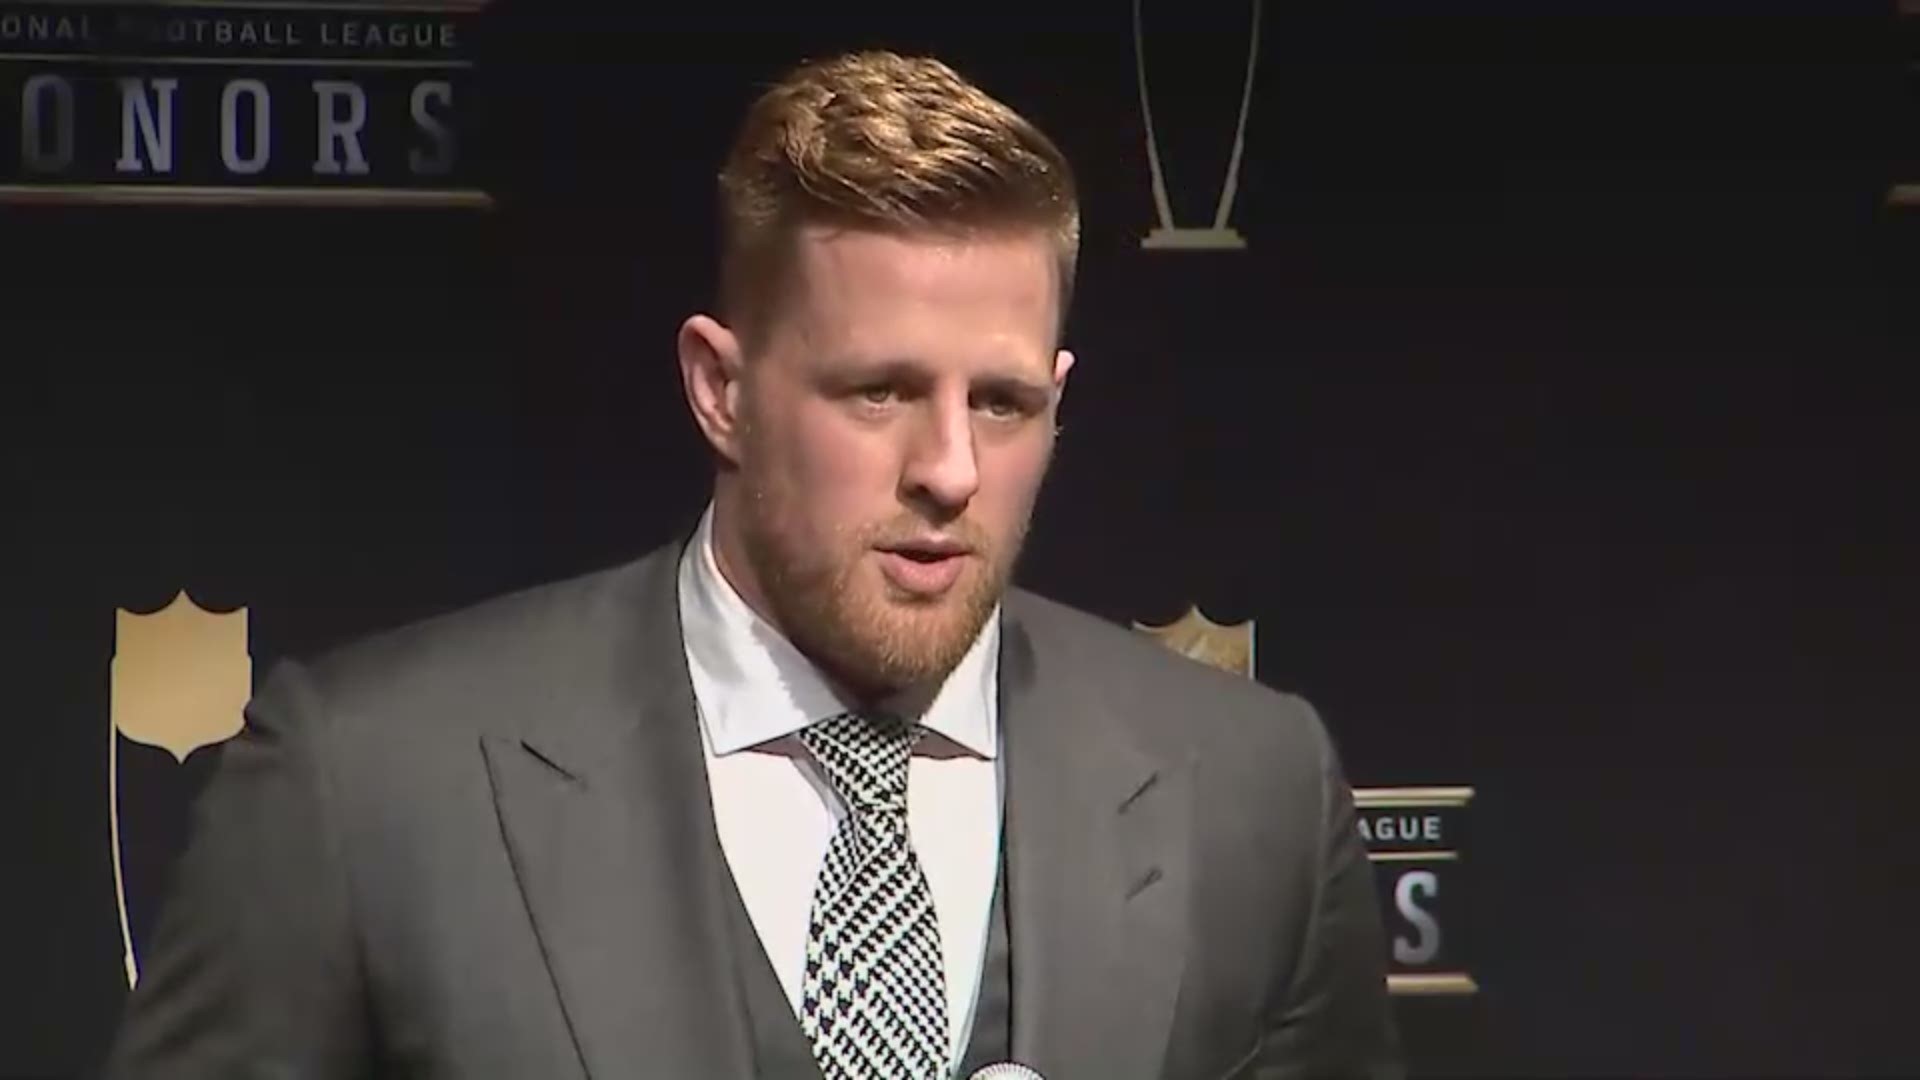 Houston Texans star JJ Watt gave an acceptance speech after winning the Walter Payton Man of the Year Award at the NFL Honors Saturday night.